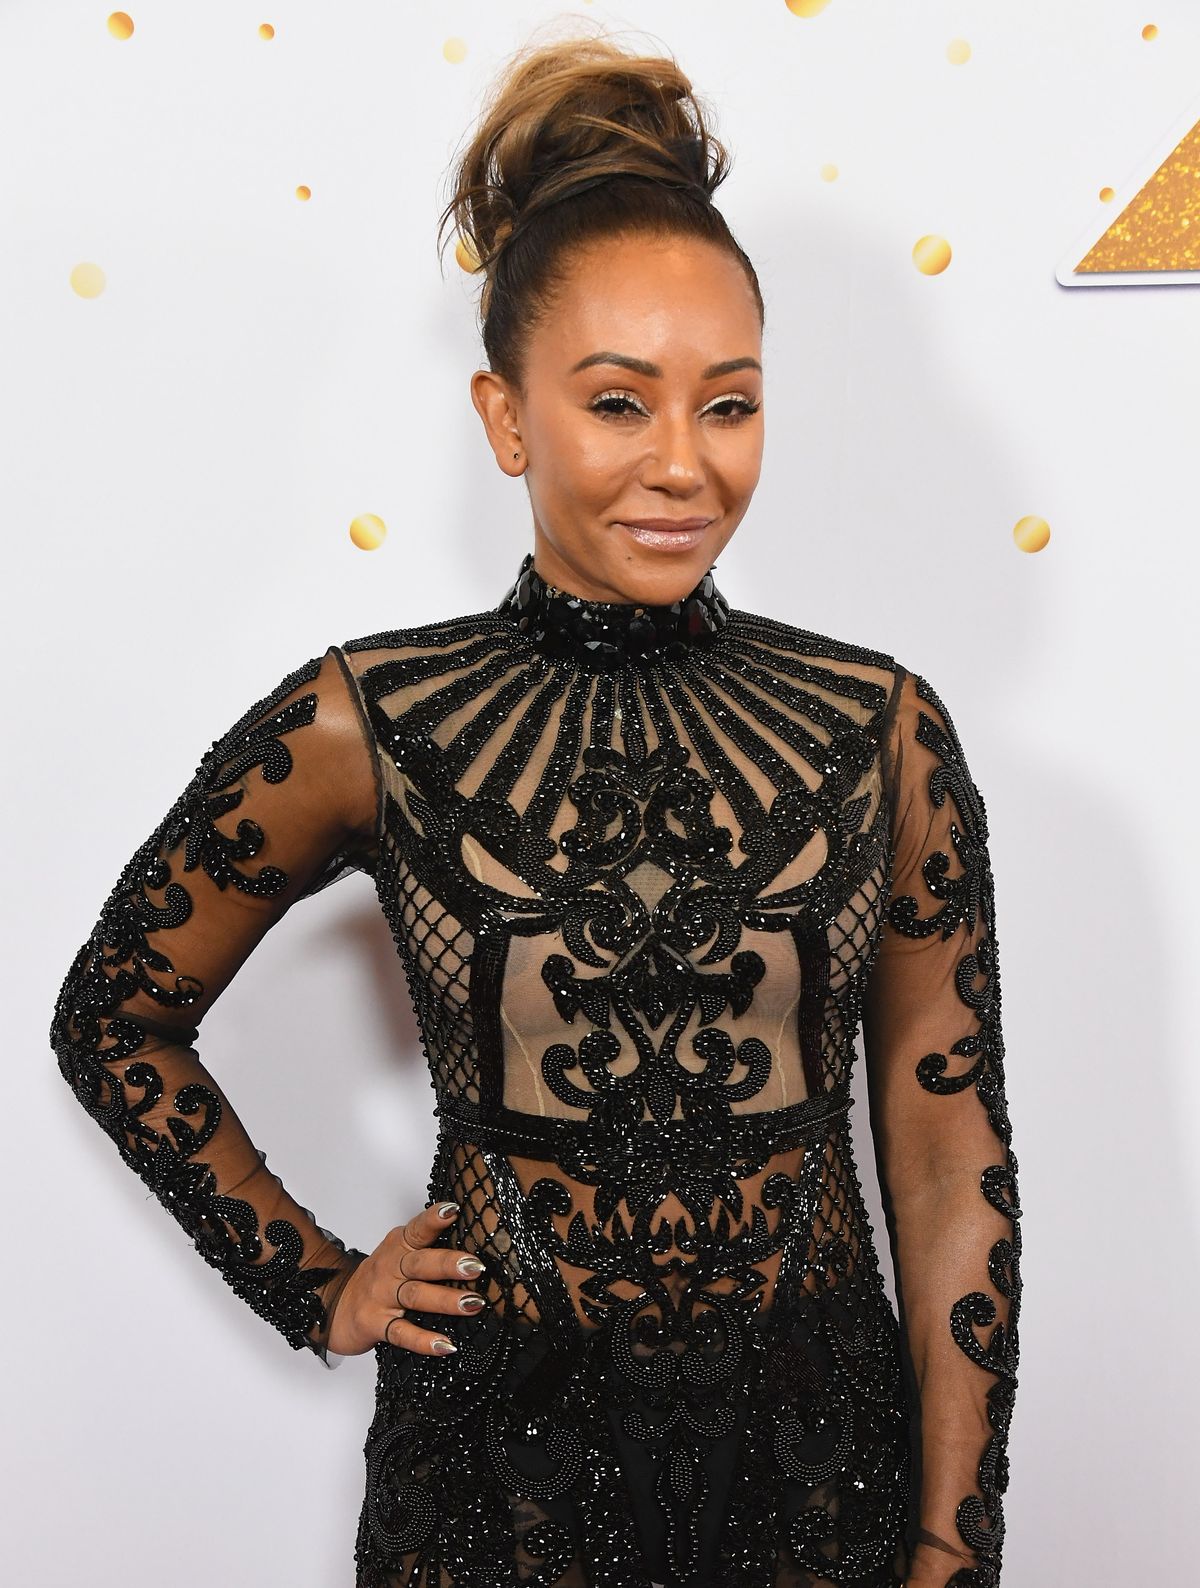 Melanie Brown Recalls Suicide Attempt - Mel B Opens Up About Her Attempted Suicide in 2014